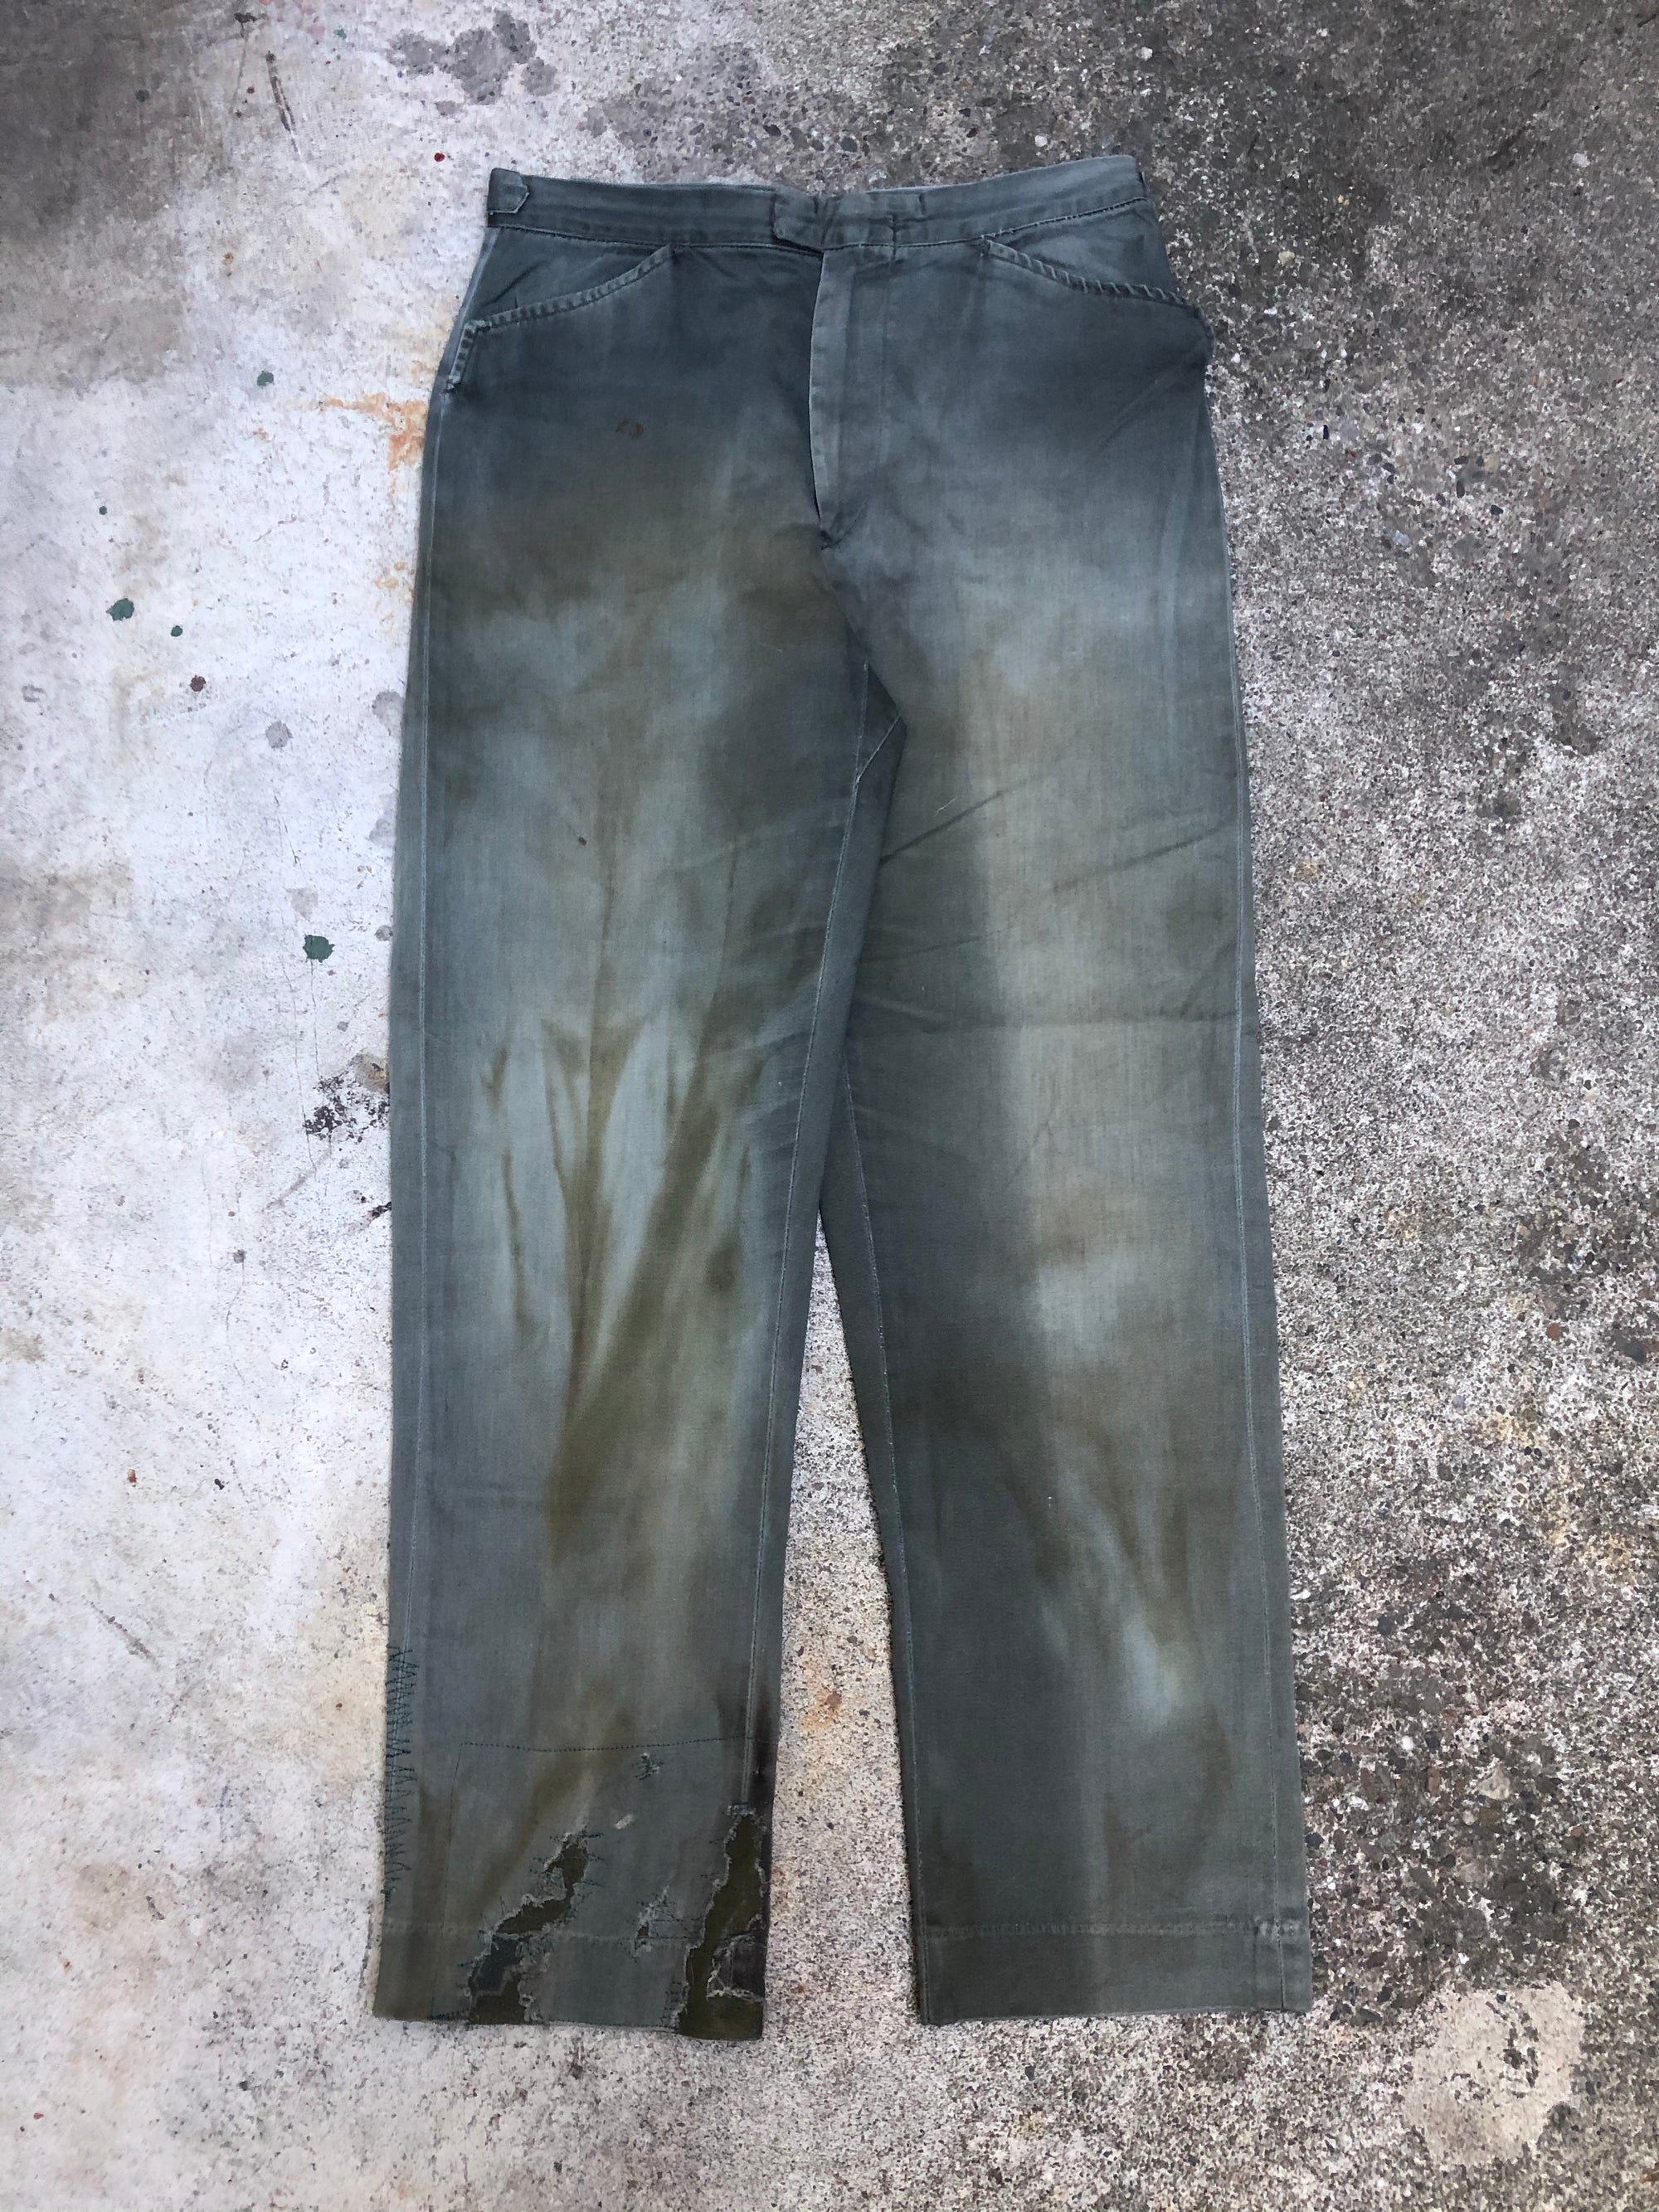 1950s Repaired Worn In Green Work Chinos (29-31X30)